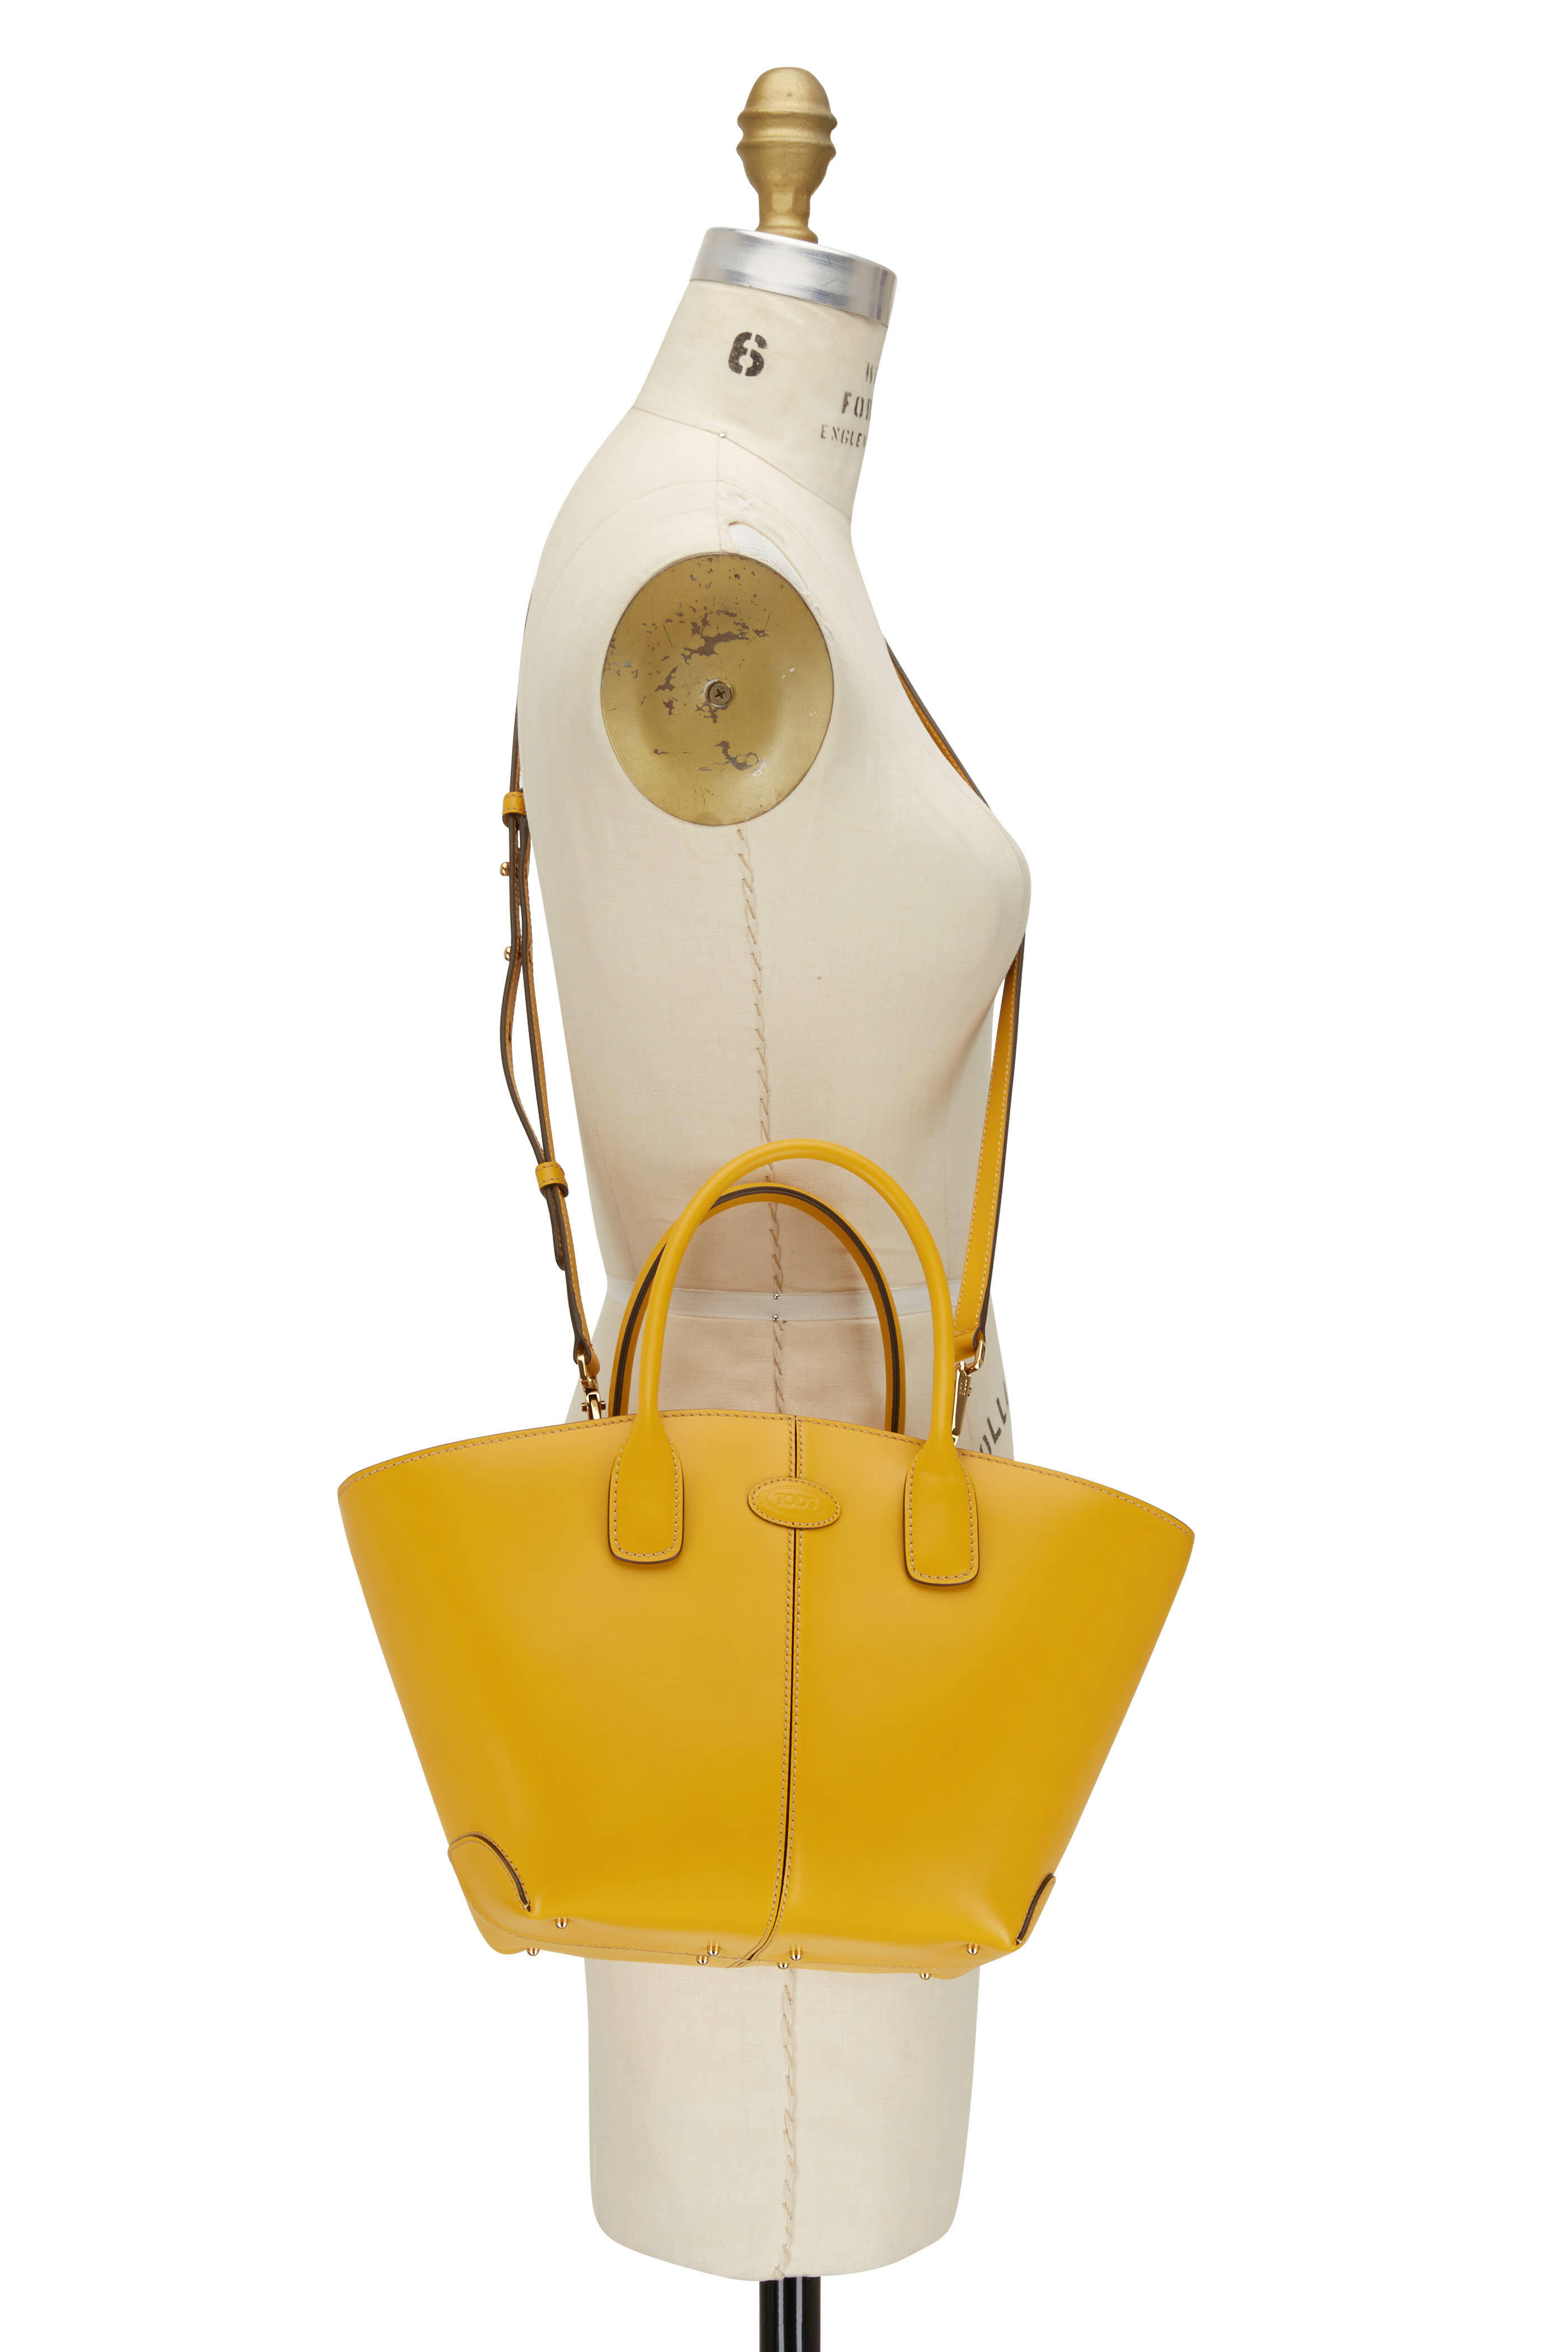 Tod's Yellow Leather Shoulder Bag